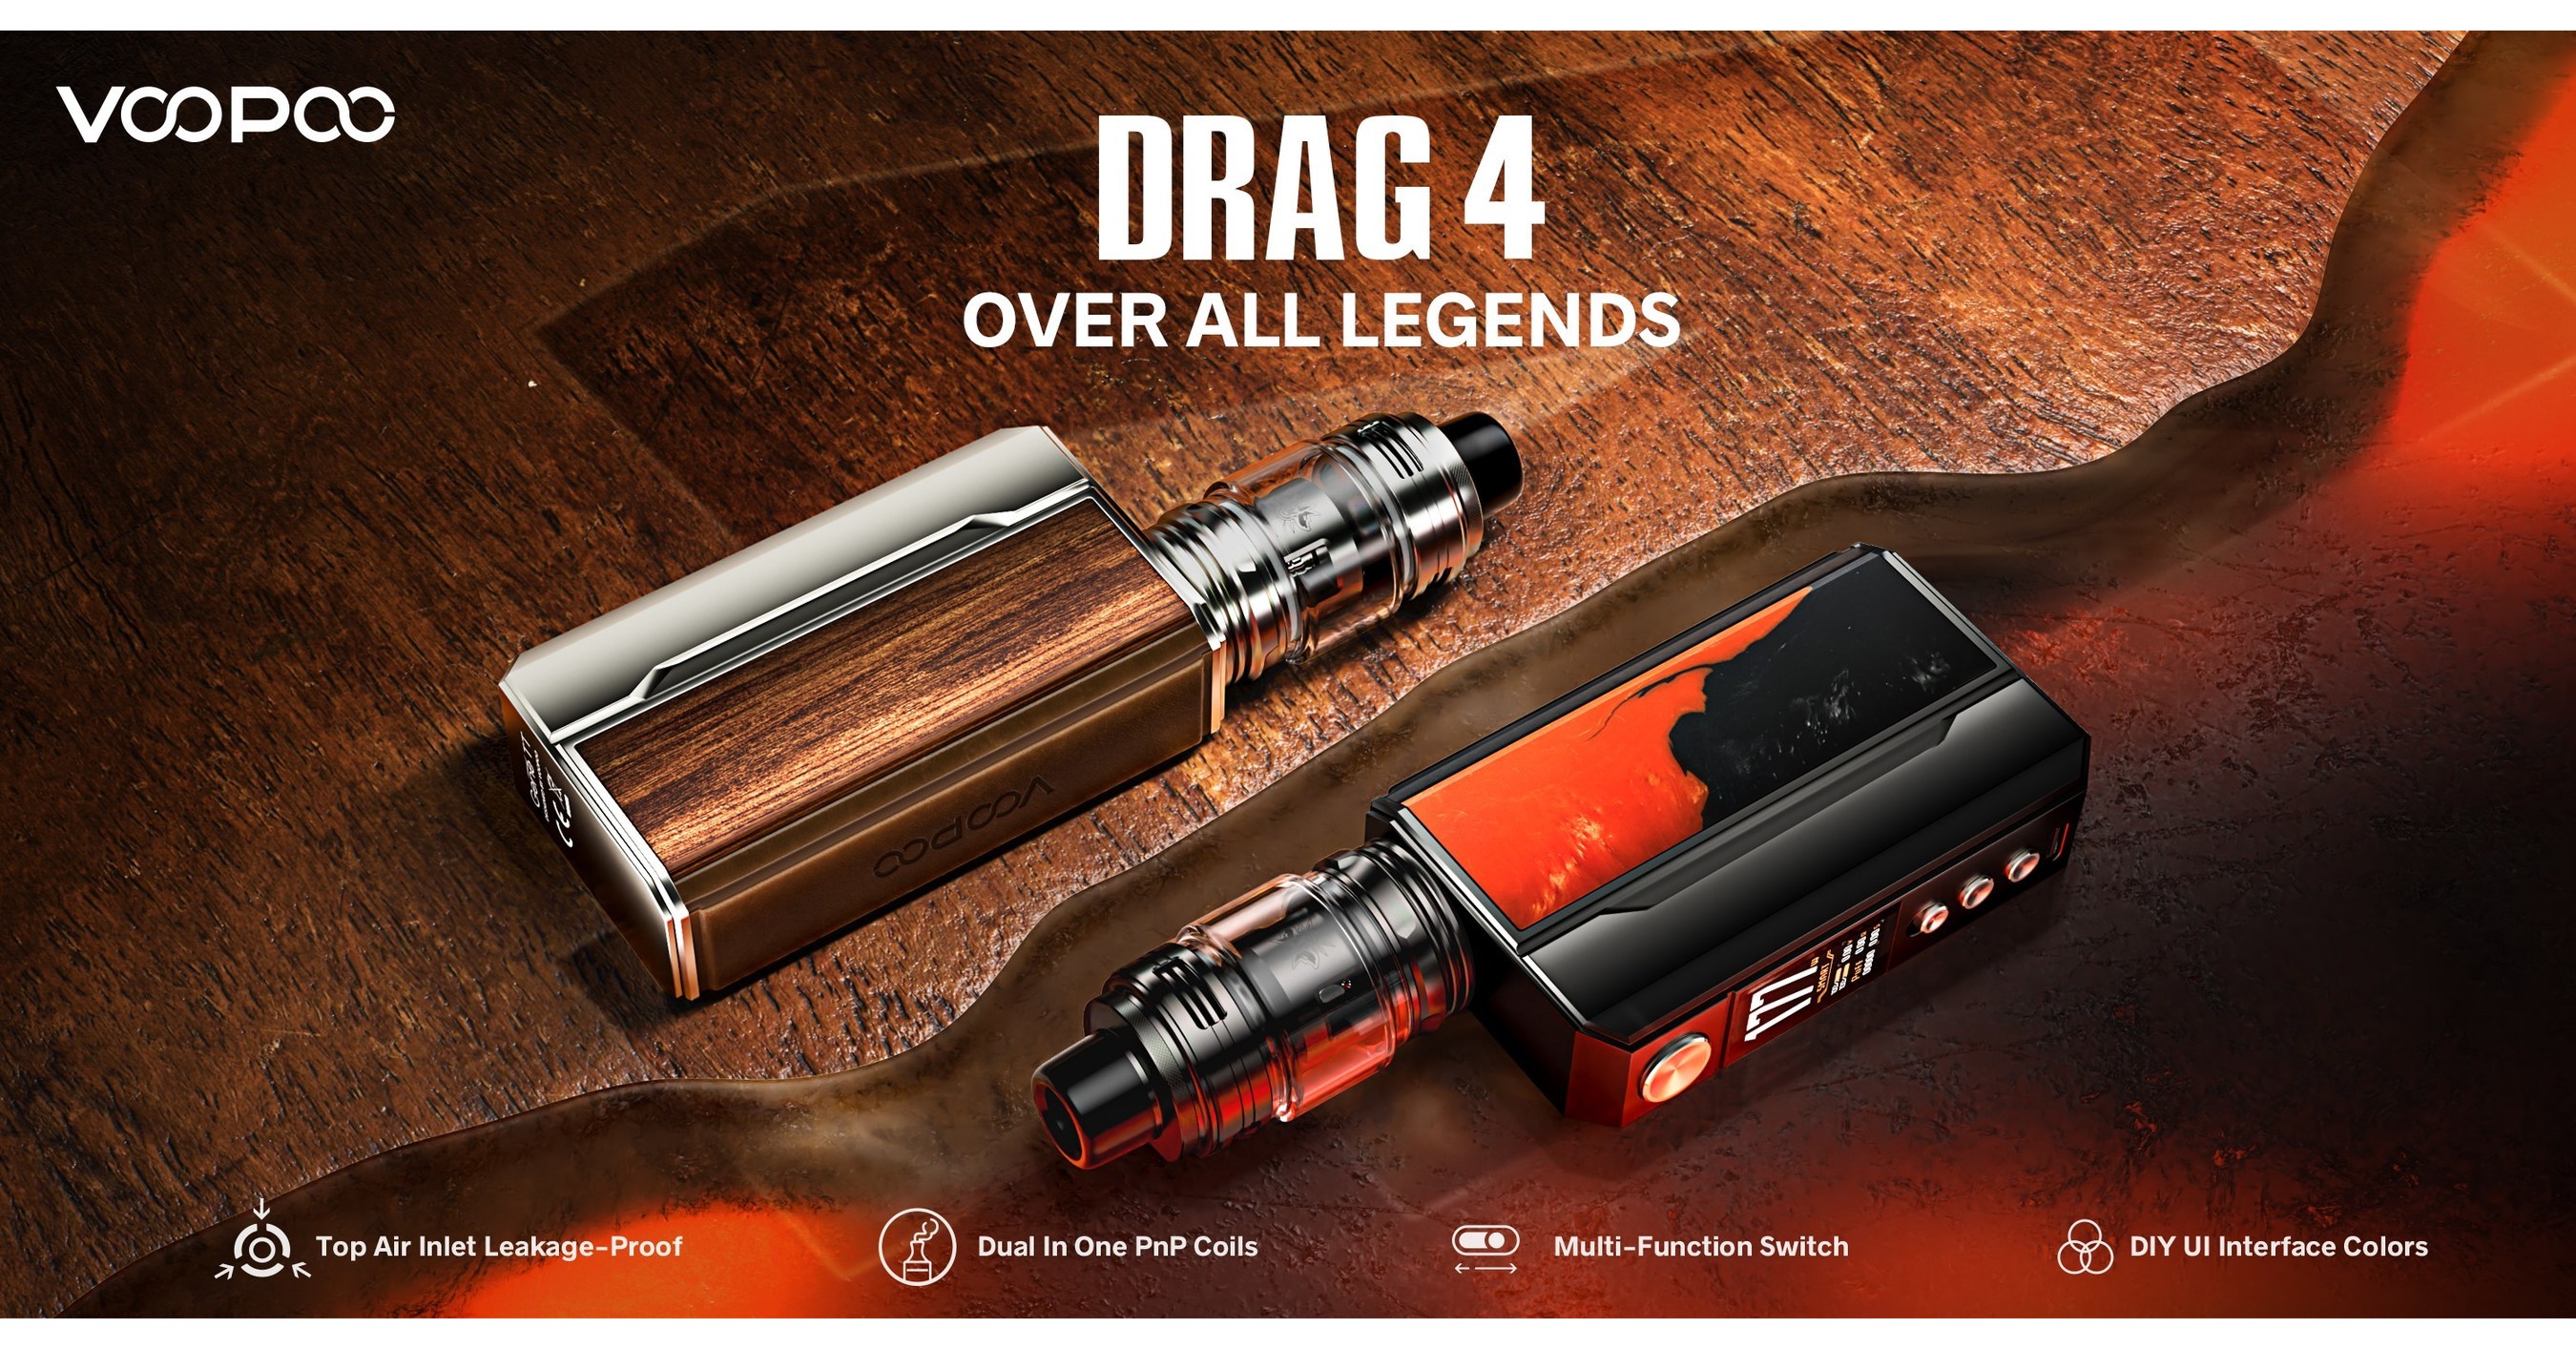 Over All Legends, VOOPOO DRAG 4 Officially Released with Its Quadruple  Uniqueness